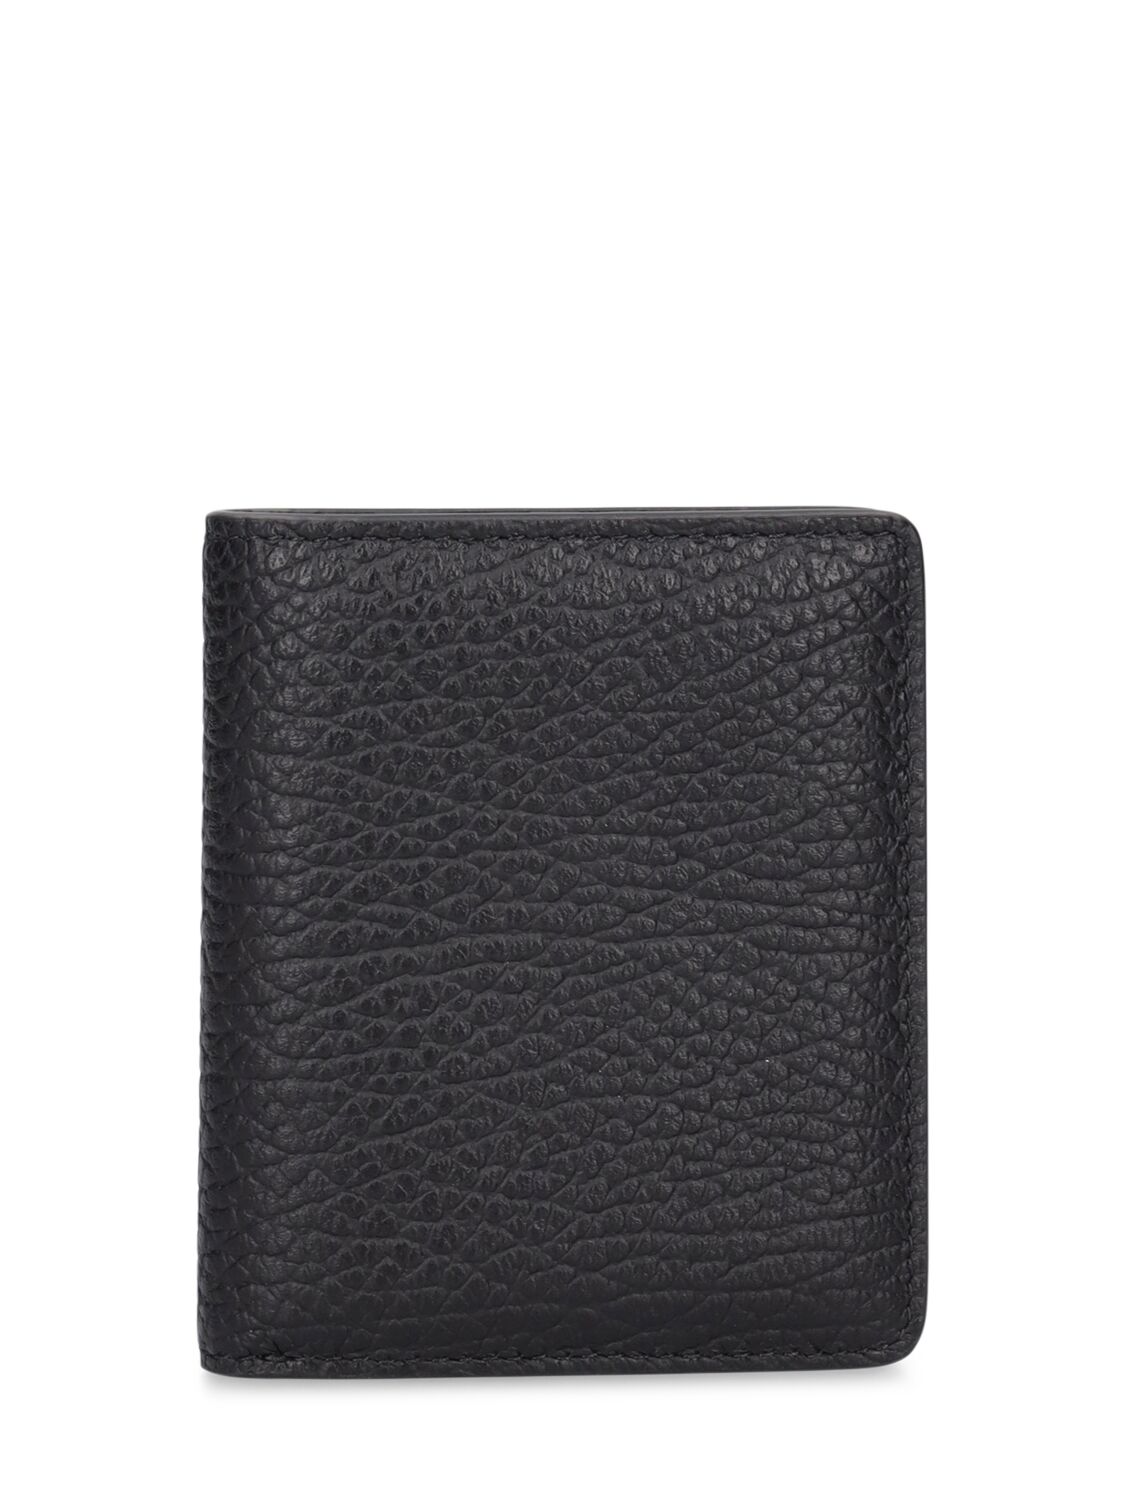 Image of Grainy Leather Clip Wallet